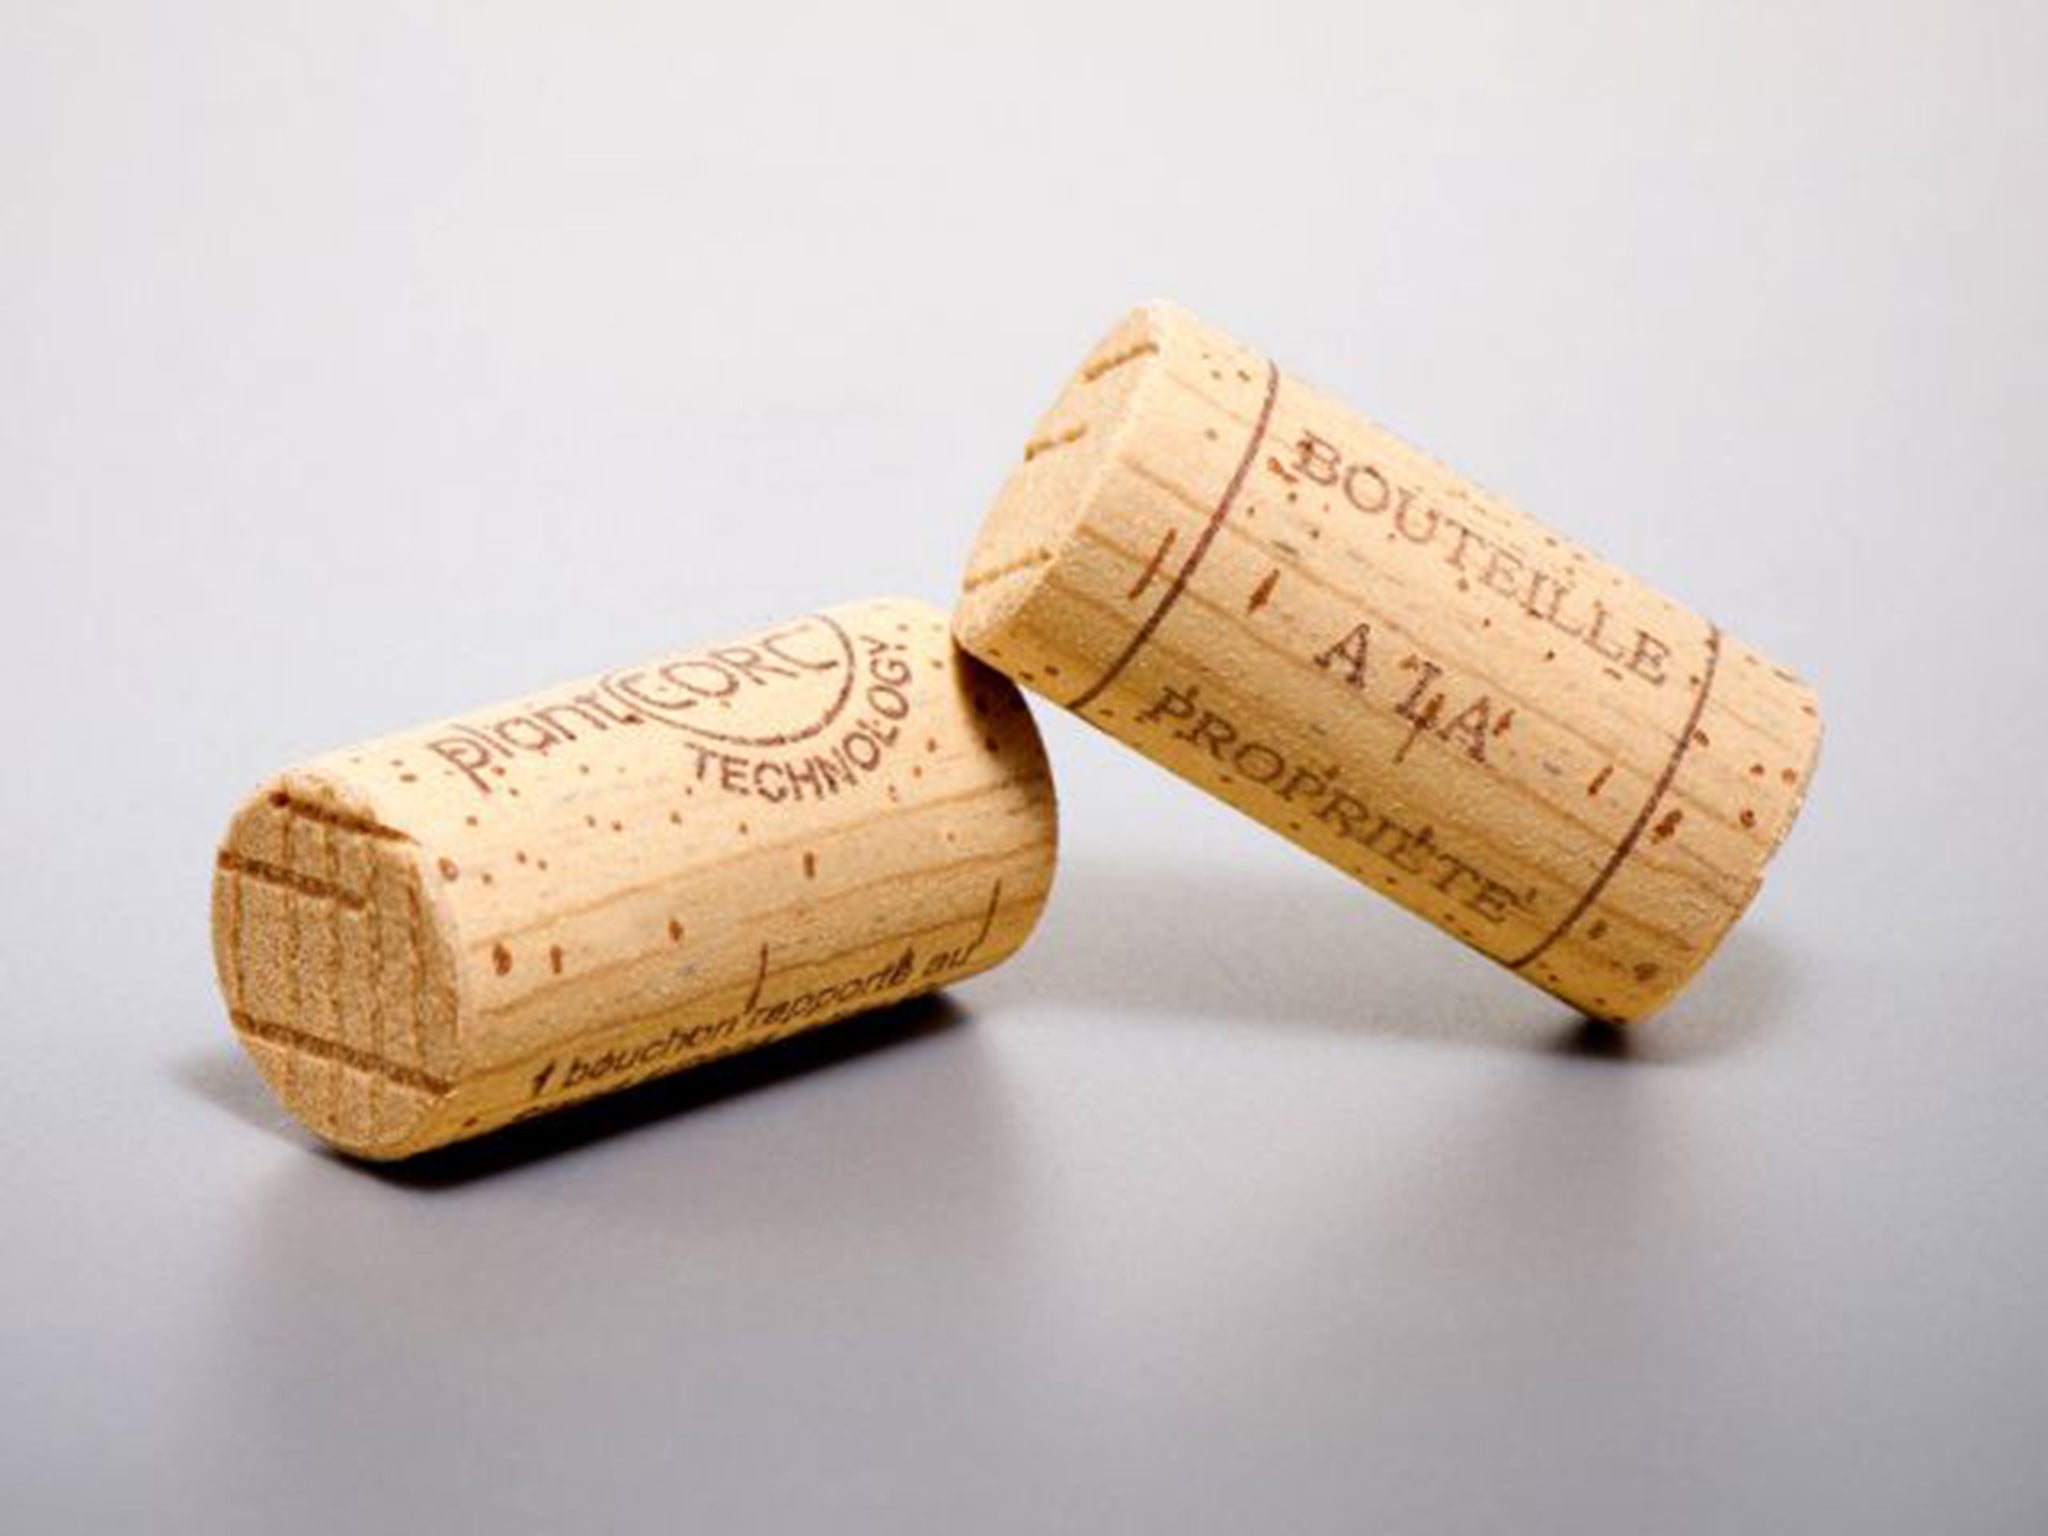 The new cork's manufacturers claim theirs is the first carbon-neutral, fully re-cyclable wine cork on the market